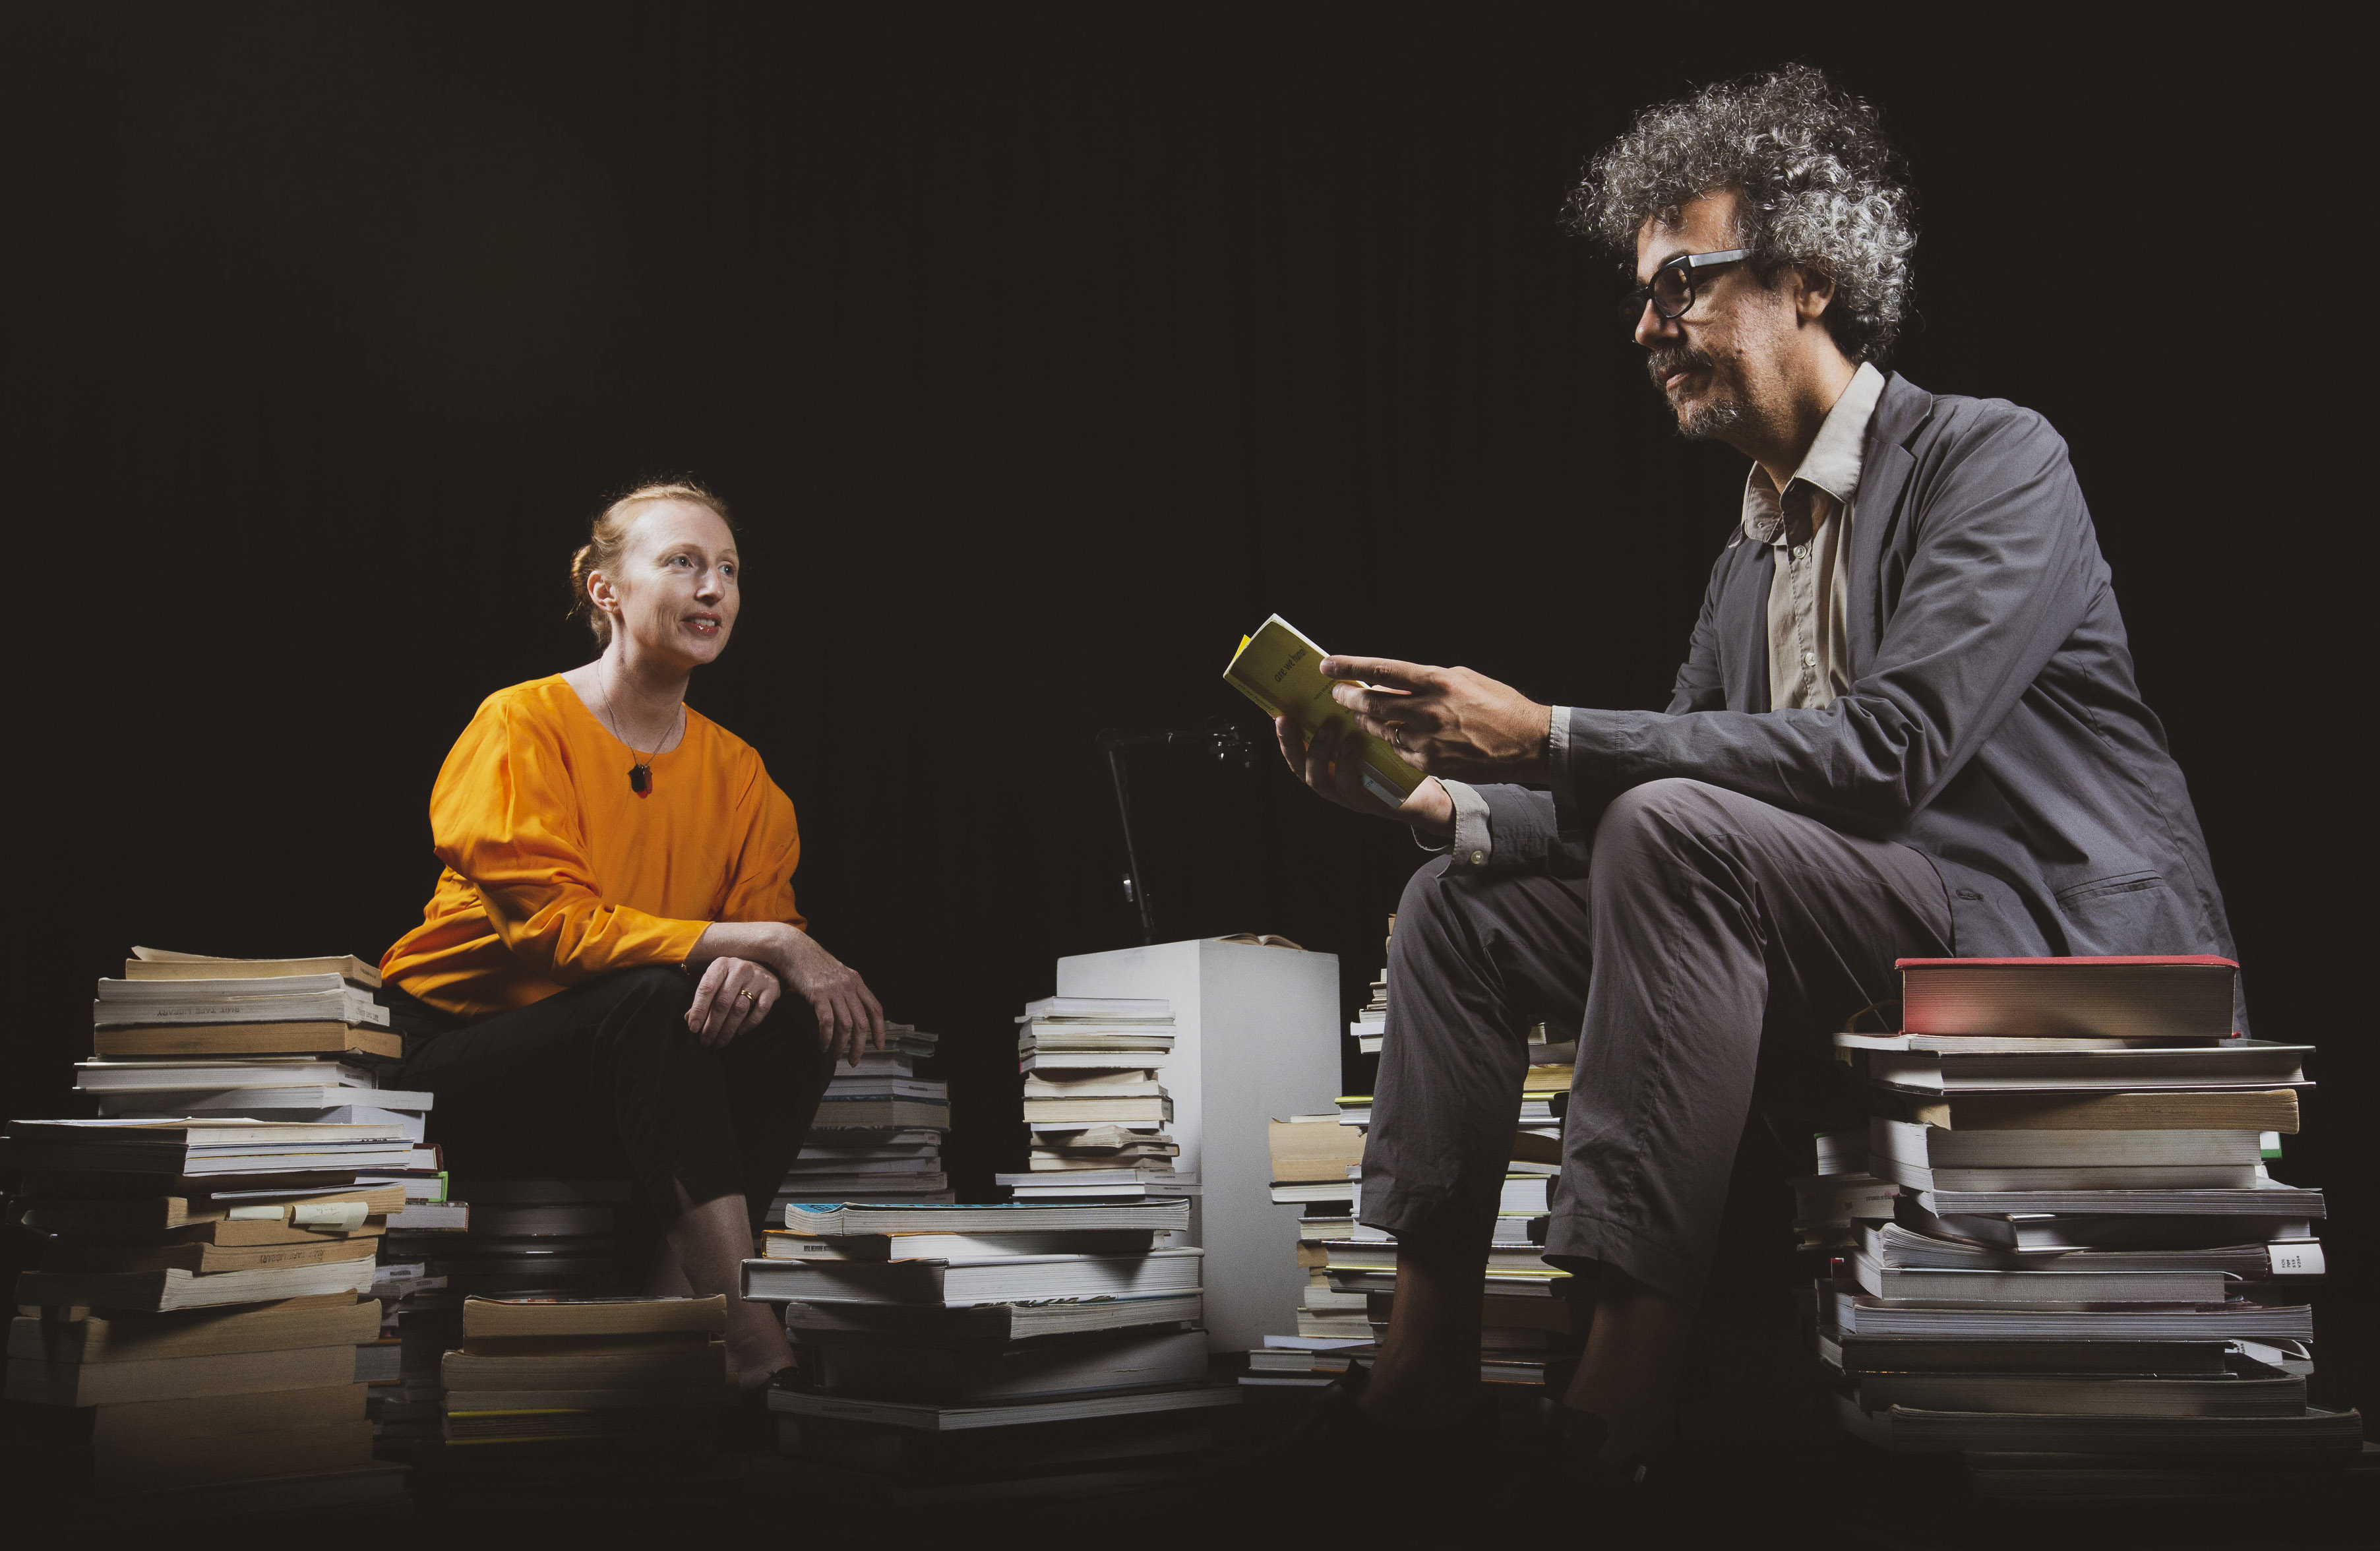 Karen ann Donnachie and Andy Simionato are interested in the future of the book as content creation and consumption radically changes. Image: Peter Clarke